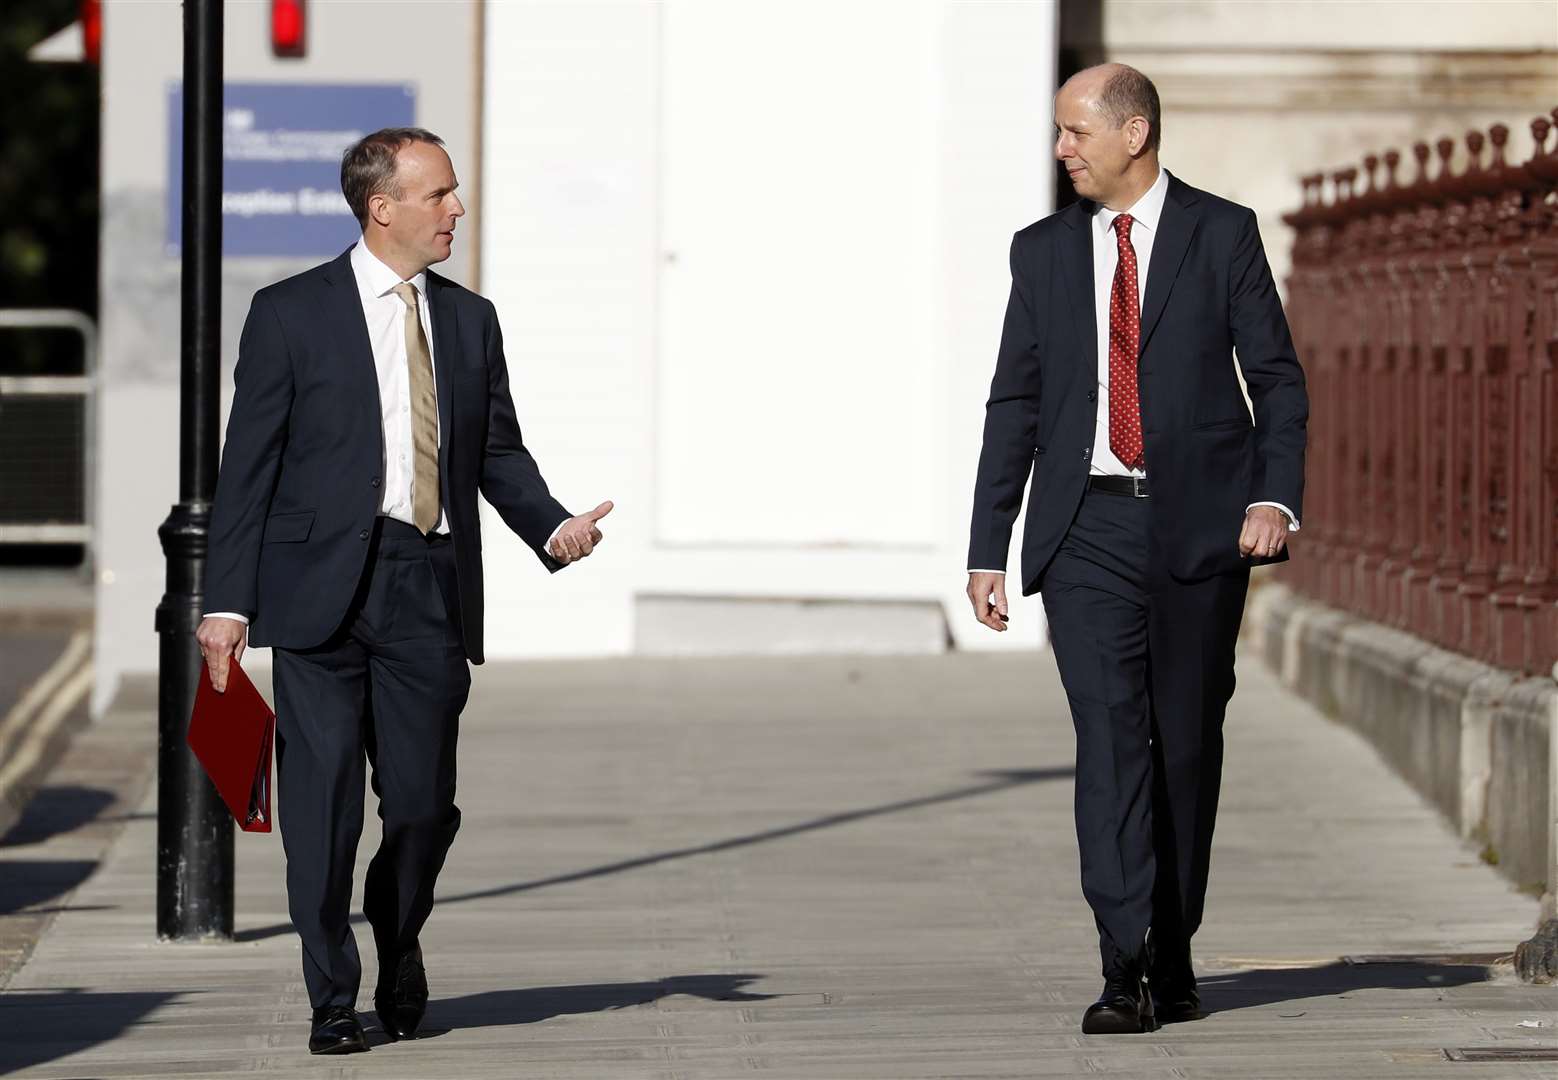 Foreign Secretary Dominic Raab and Permanent Under Secretary Philip Barton arrive at the newly named Foreign, Commonwealth and Development office in King Charles Street, Westminster (Alastair Grant/PA)